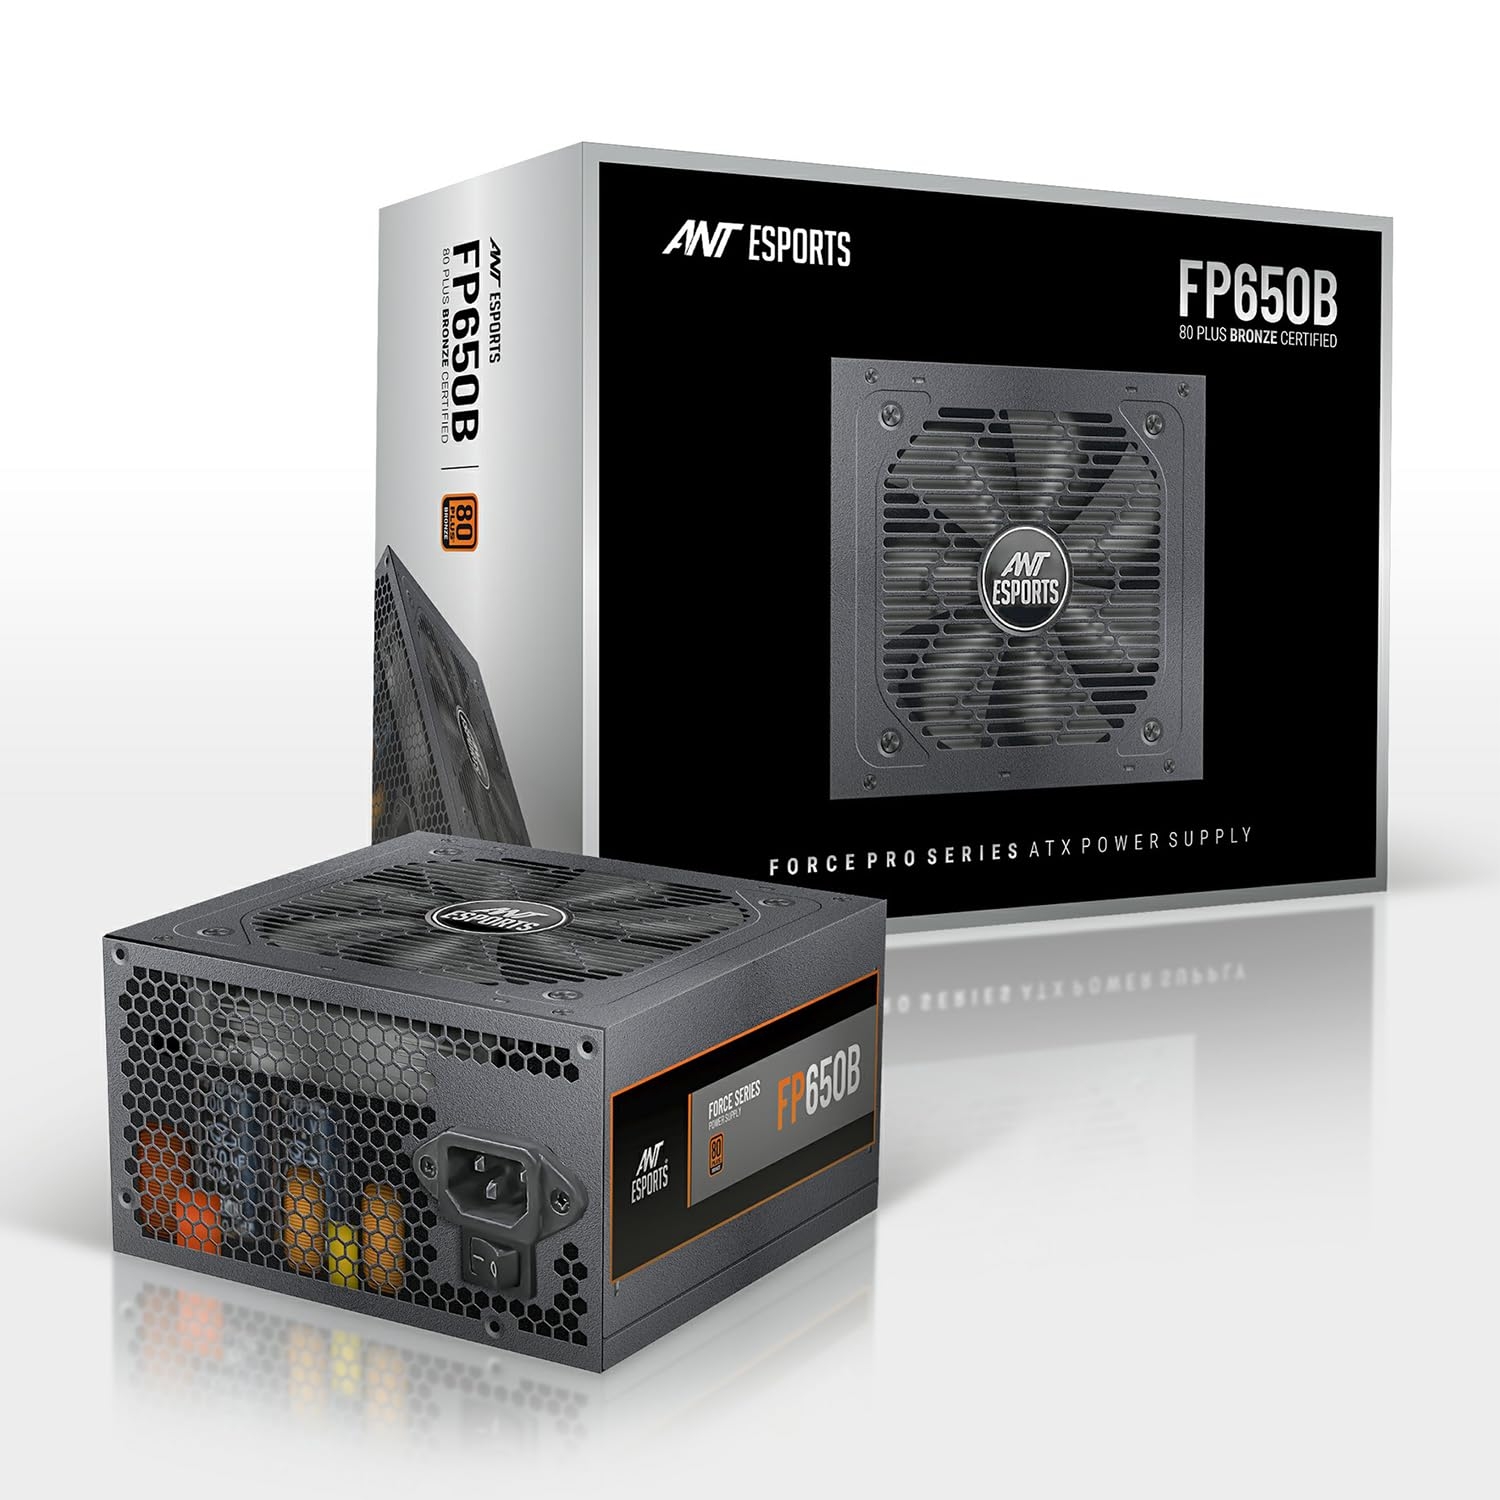 Ant Esports FP750B 80 Plus Bronze Certified Non Modular Gaming Power Supply/PSU with Active PFC, Flat Black Cables and Silent Fan